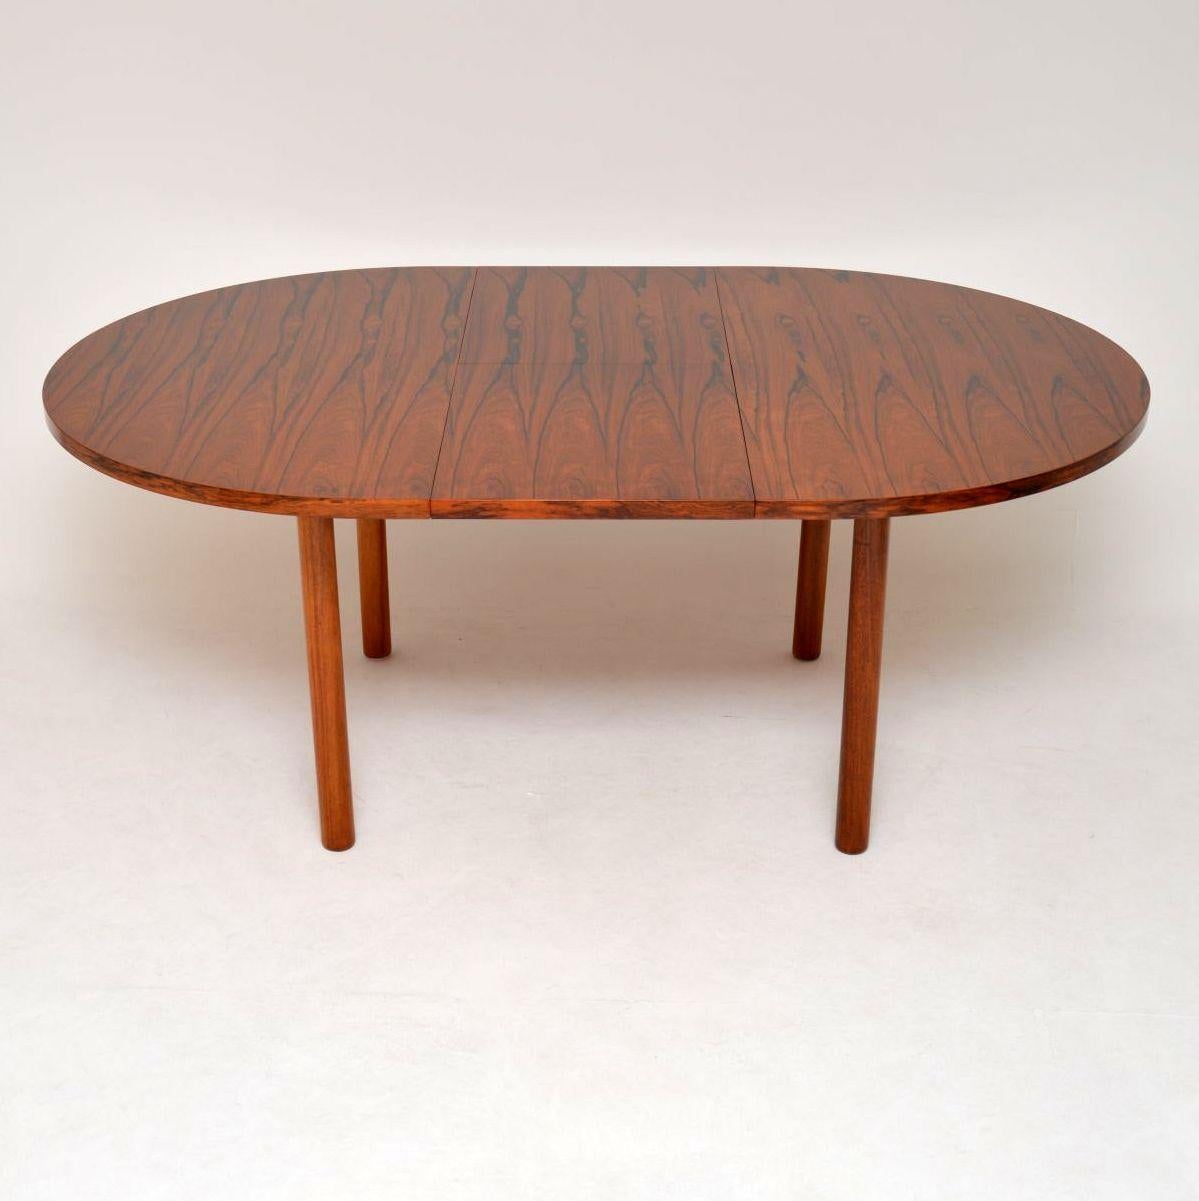 British 1960s Vintage Dining Table by Robert Heritage for Archie Shine